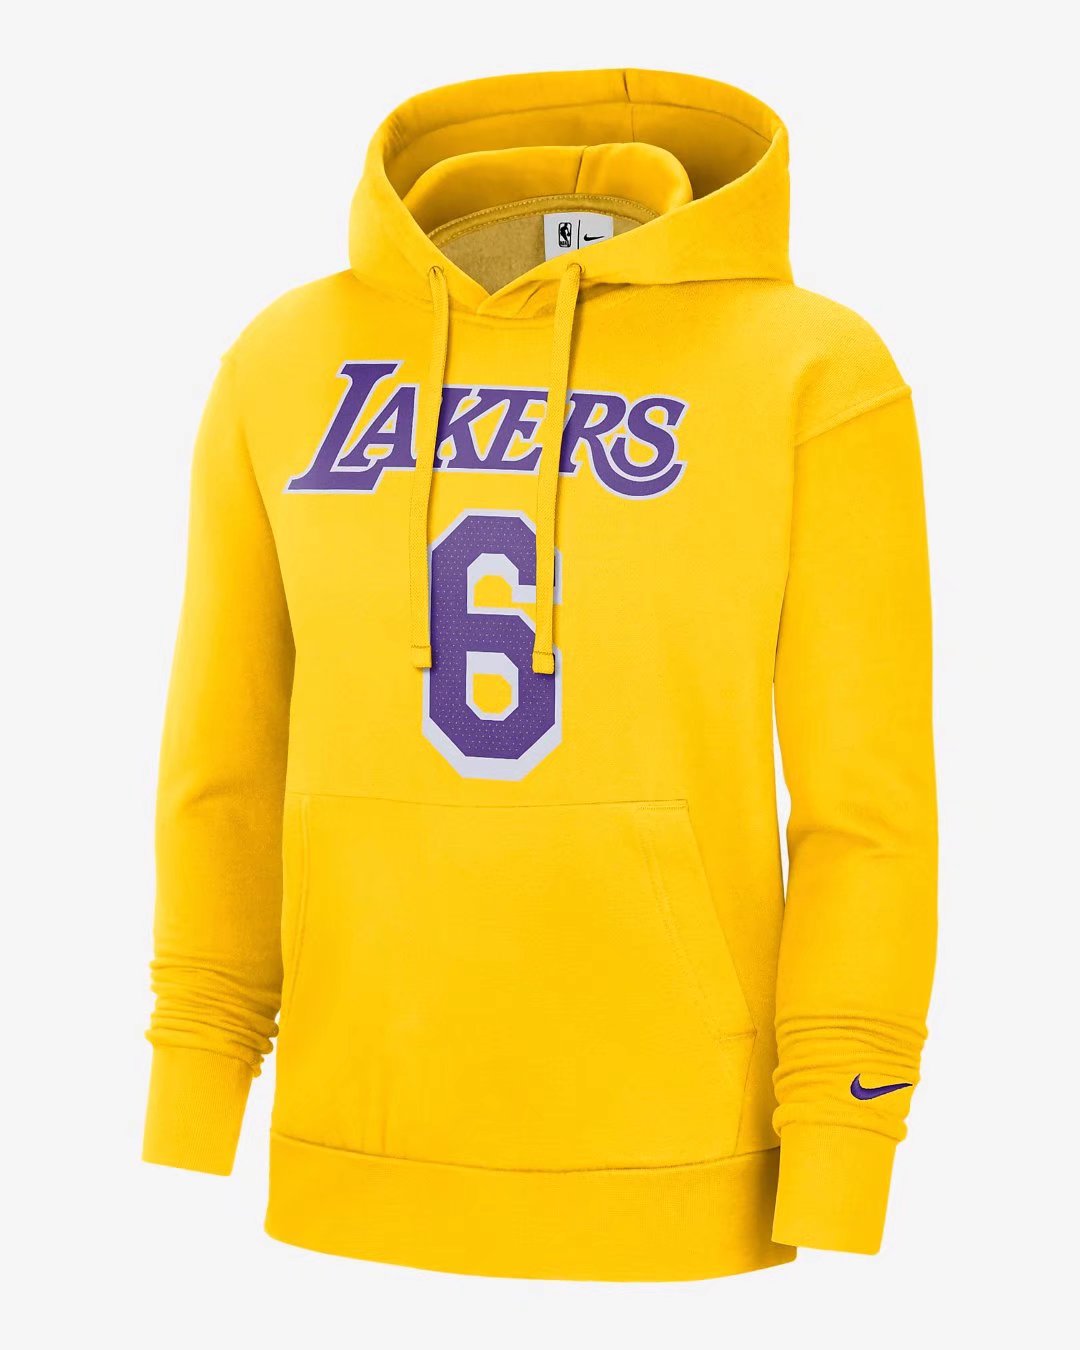 2020-2021 NBA Los Angeles Lakers Yellow With Hat Tracksuit Top-815